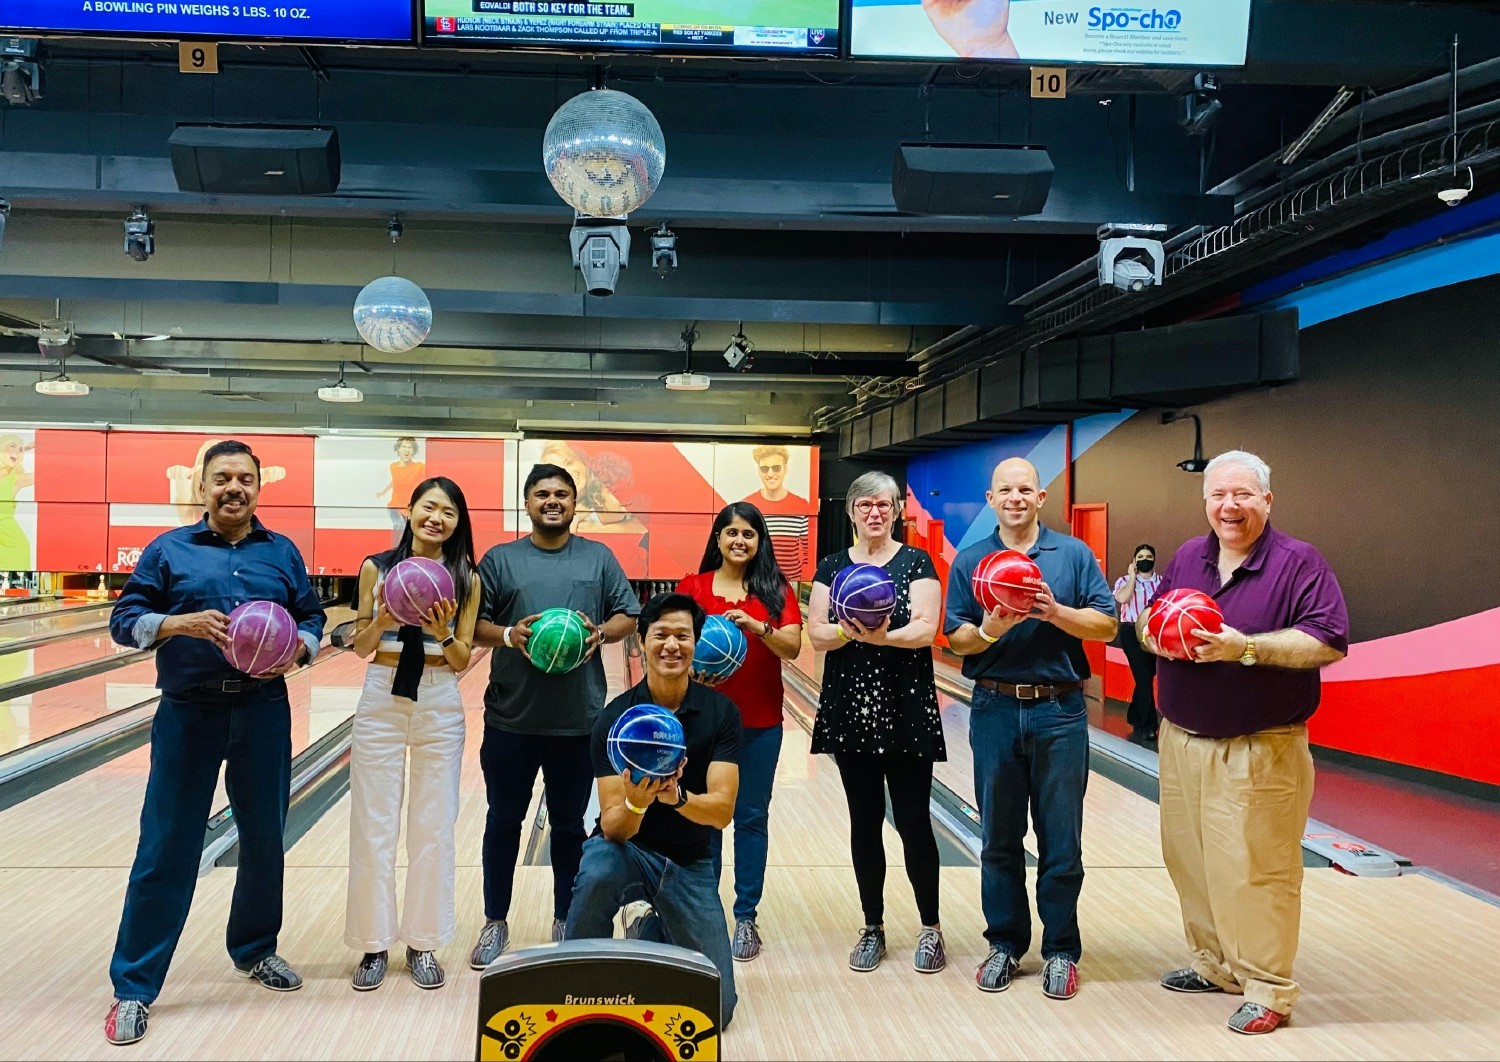 IT Bowling Event: With no physical offices, we meet throughout the year to build connections and have fun.